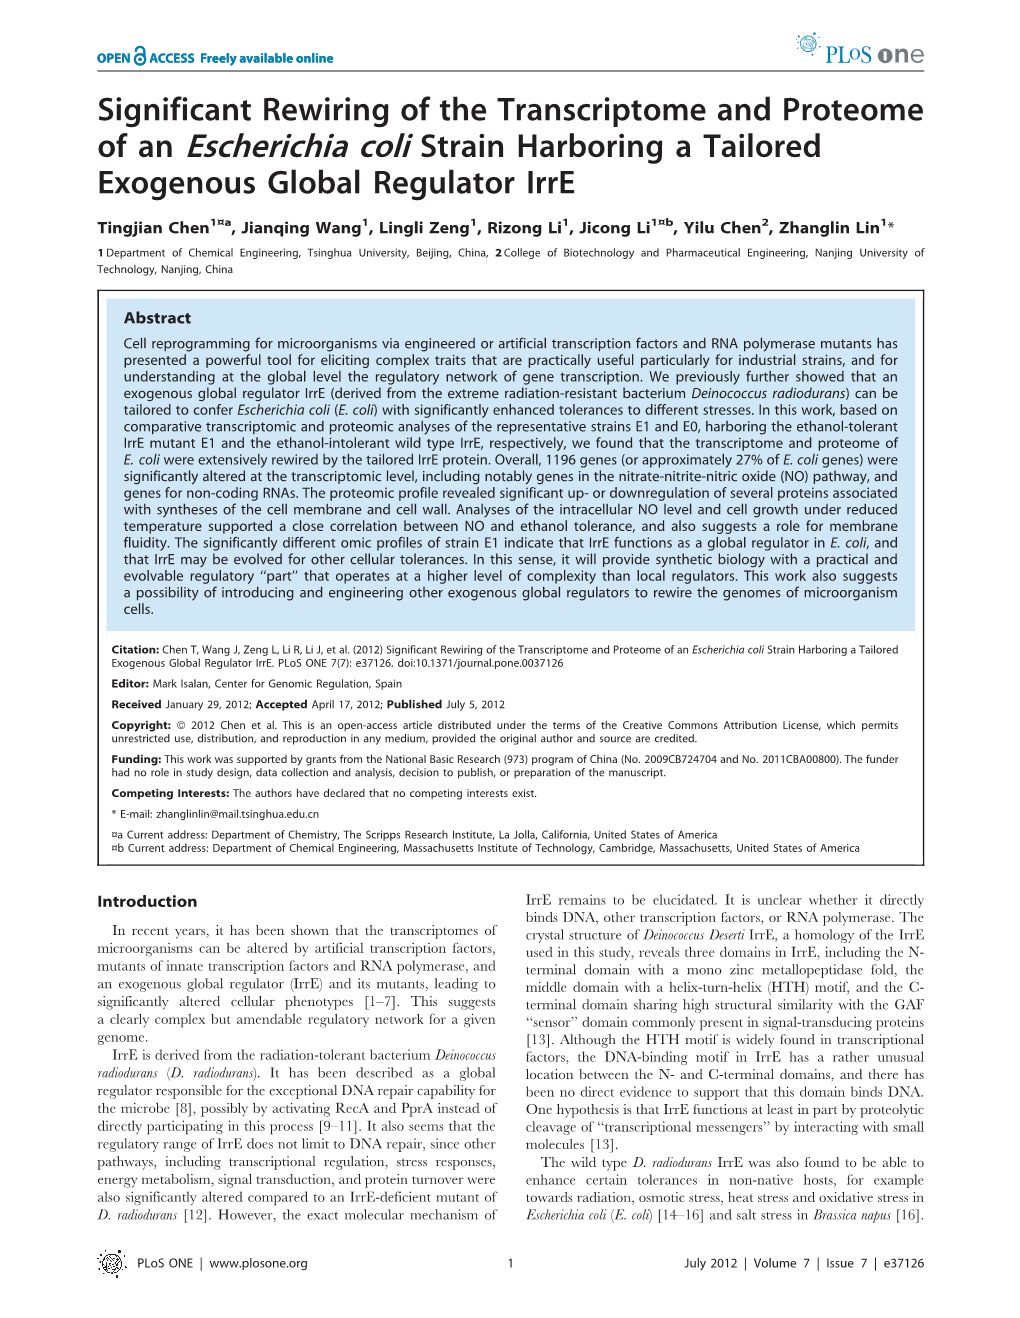 Significant Rewiring of the Transcriptome and Proteome of an Escherichia Coli Strain Harboring a Tailored Exogenous Global Regulator Irre